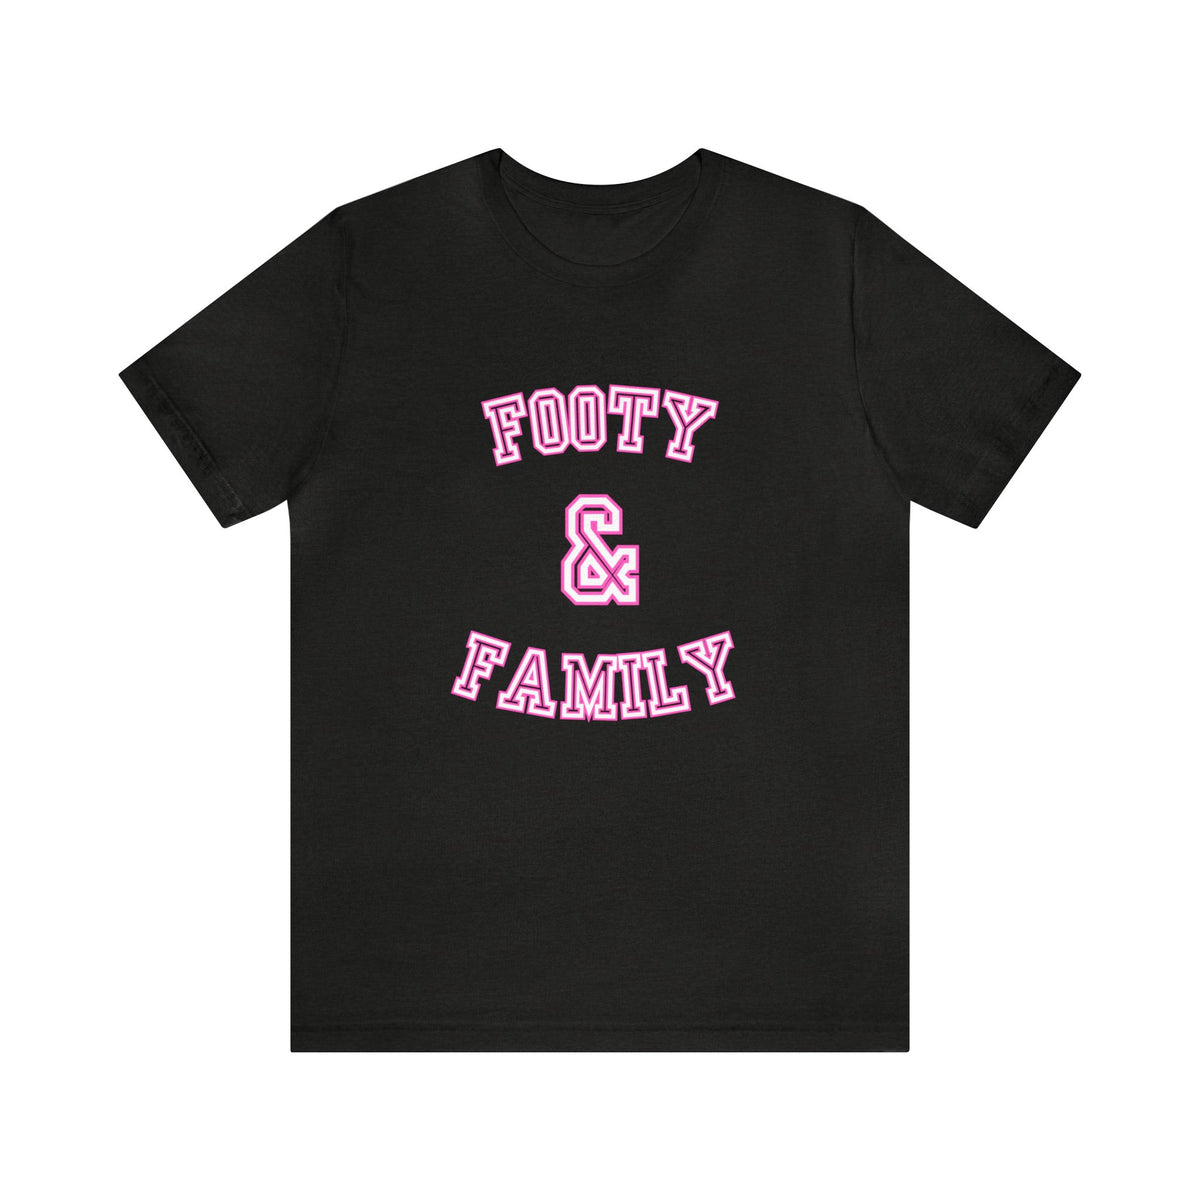 Footy and Family Adult T-Shirt